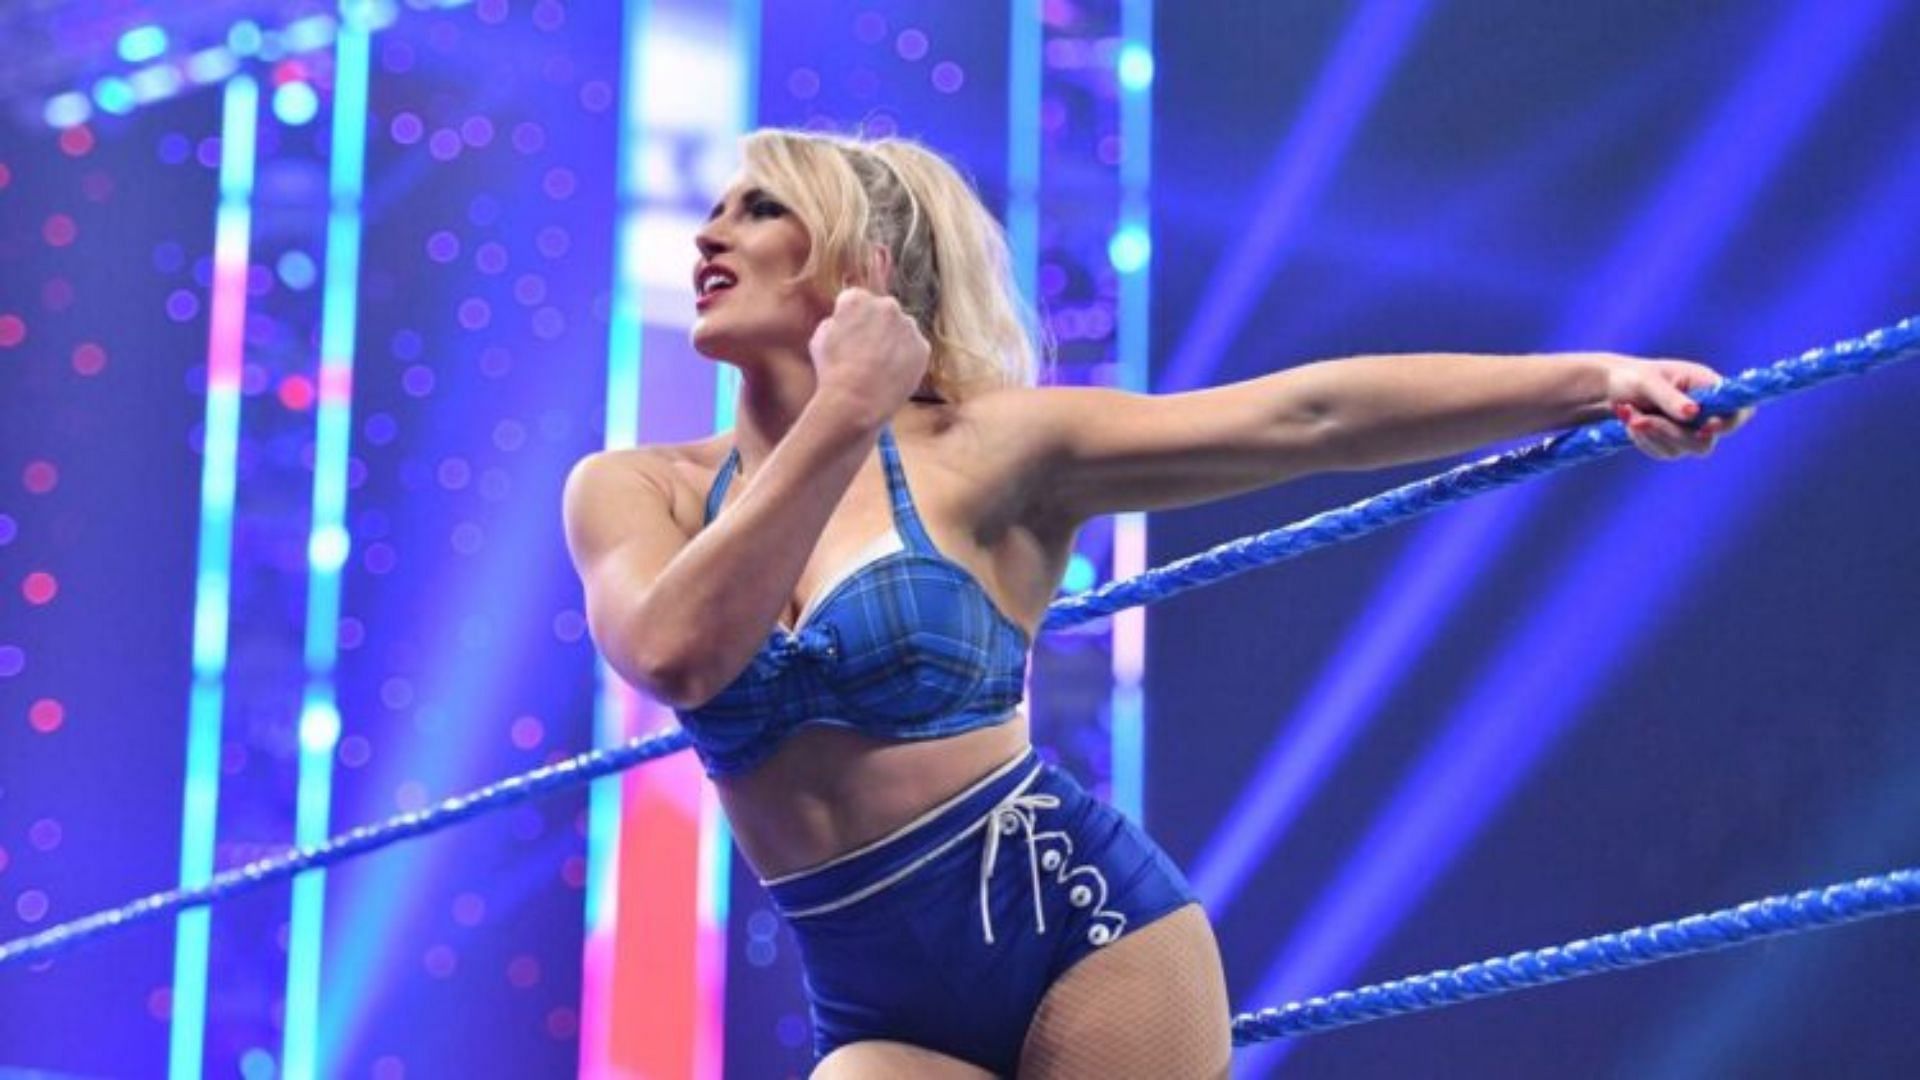 Lacey Evans returned earlier in 2022 as a babyface